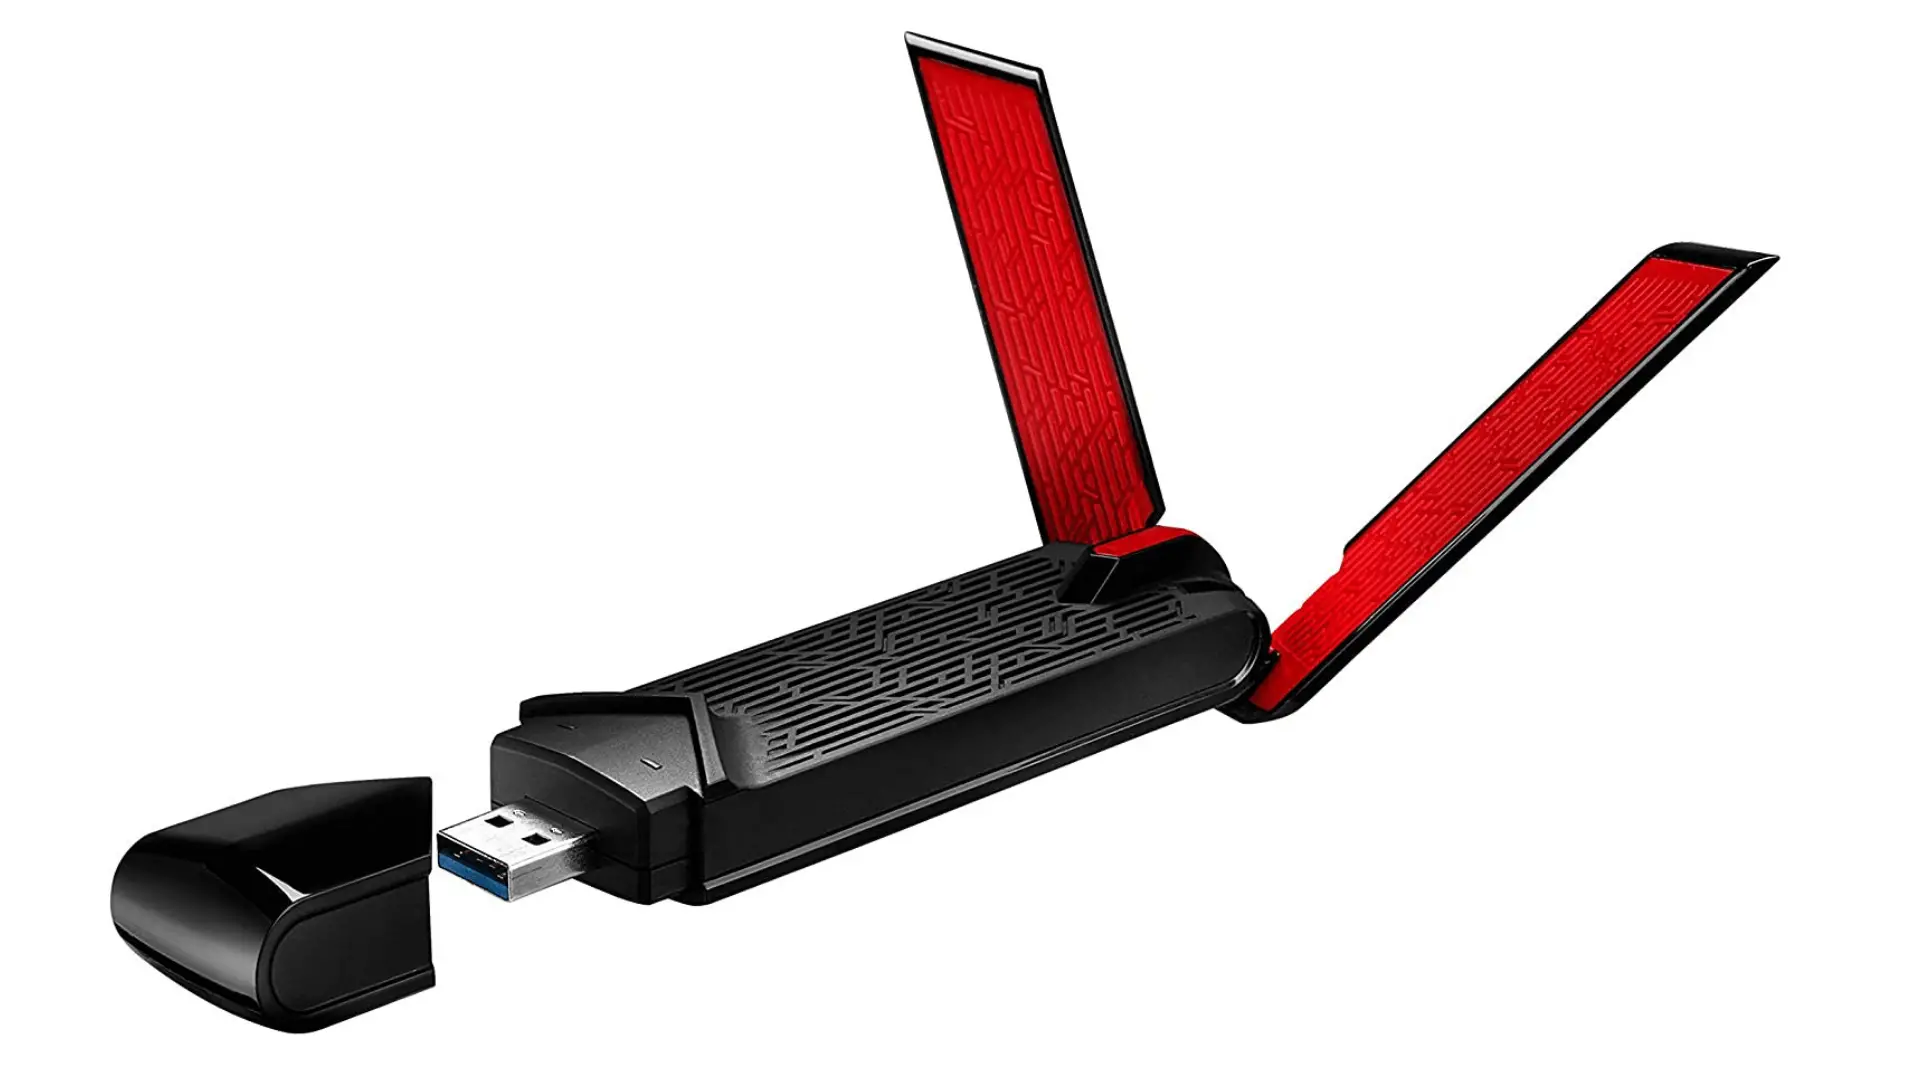 ASUS-AC68 WiFi adapter with a cover and two adjustable antennas with a red interior